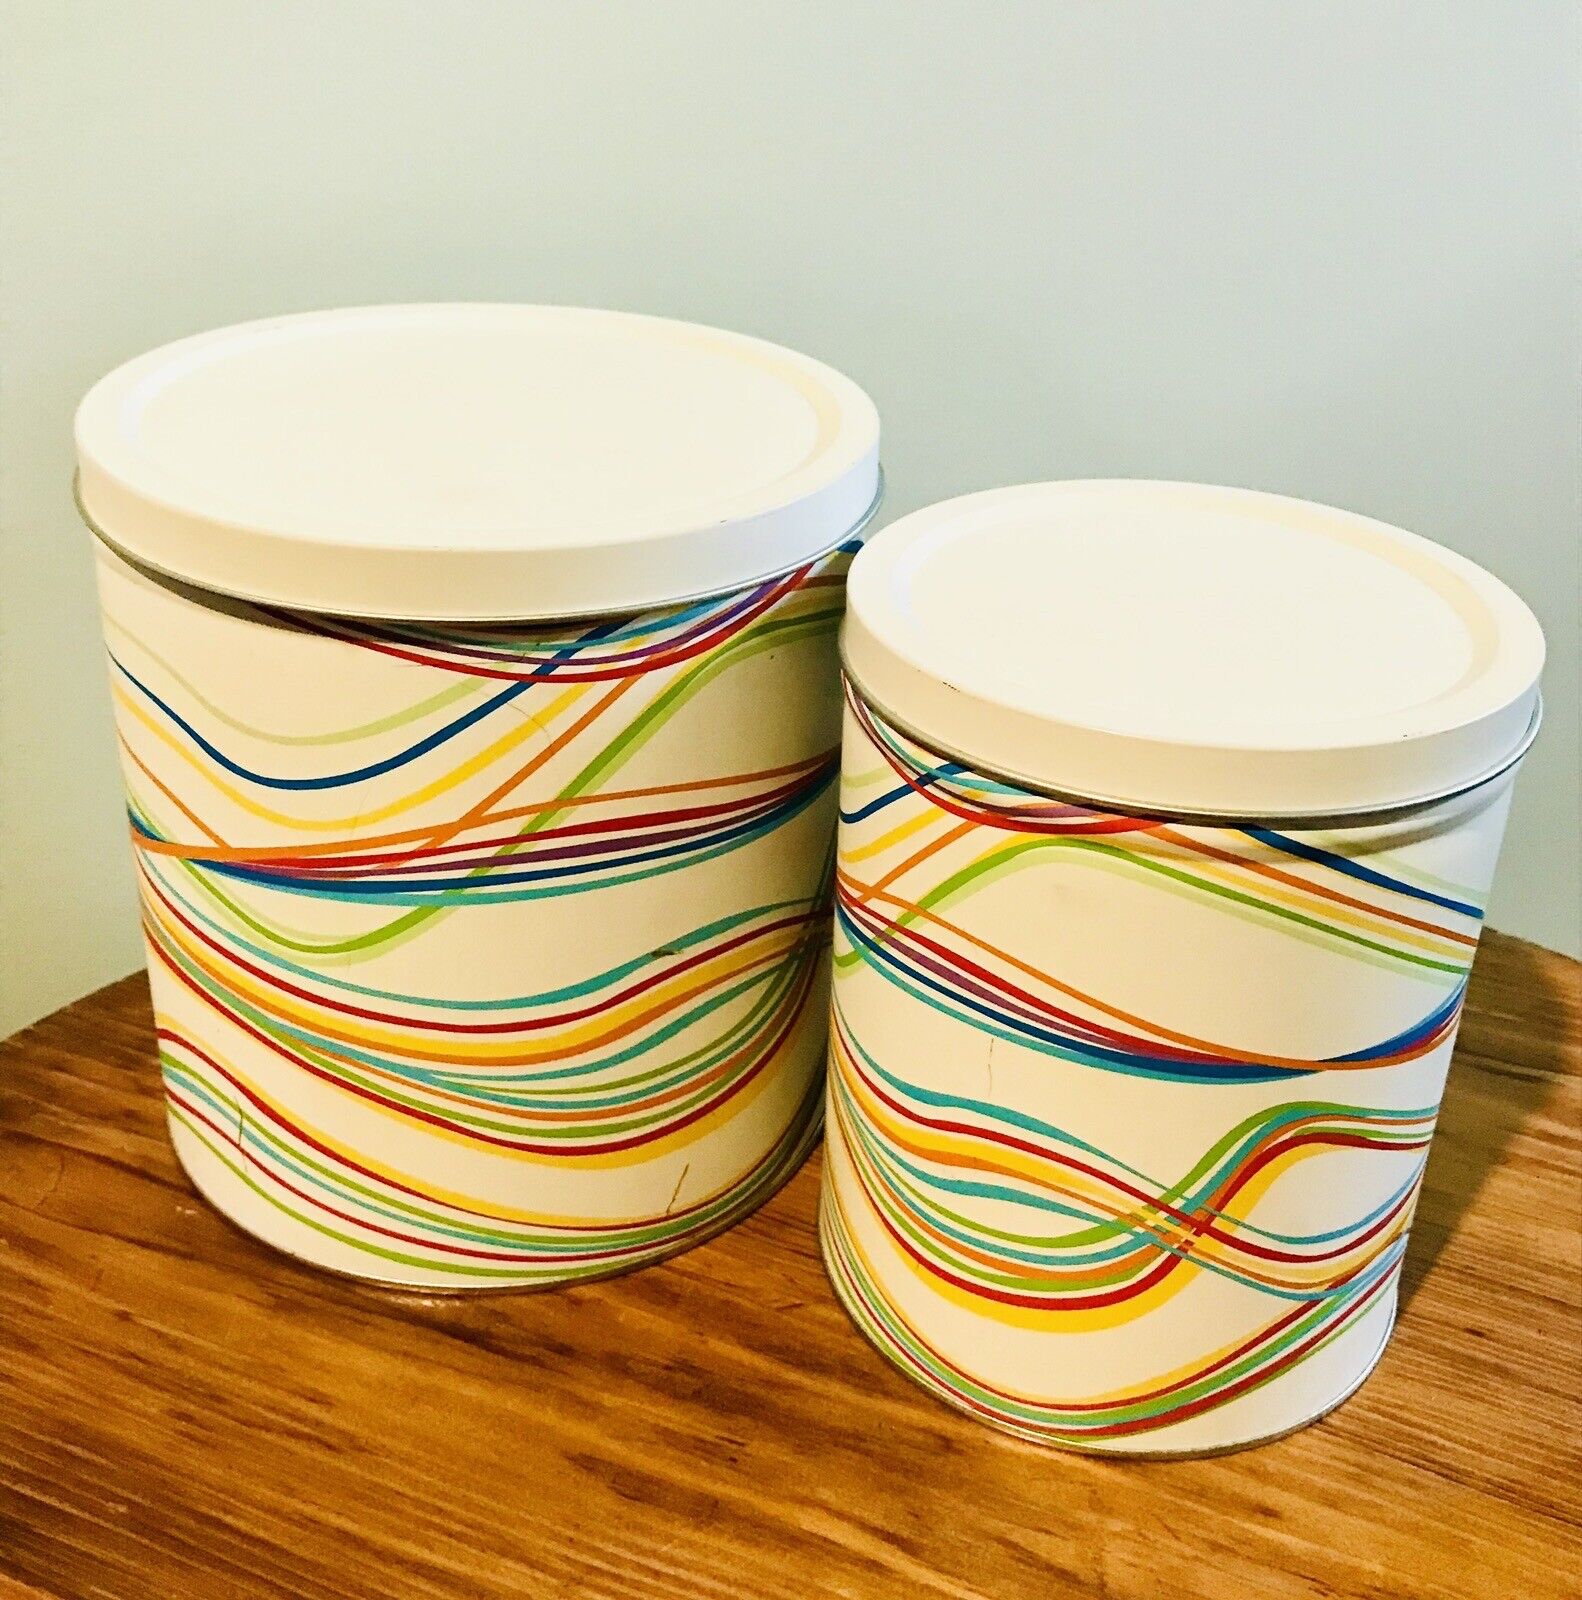 Vintage Set of 2 Graduating Ikea Nesting Tin Canisters w Lids in Rainbow Colors